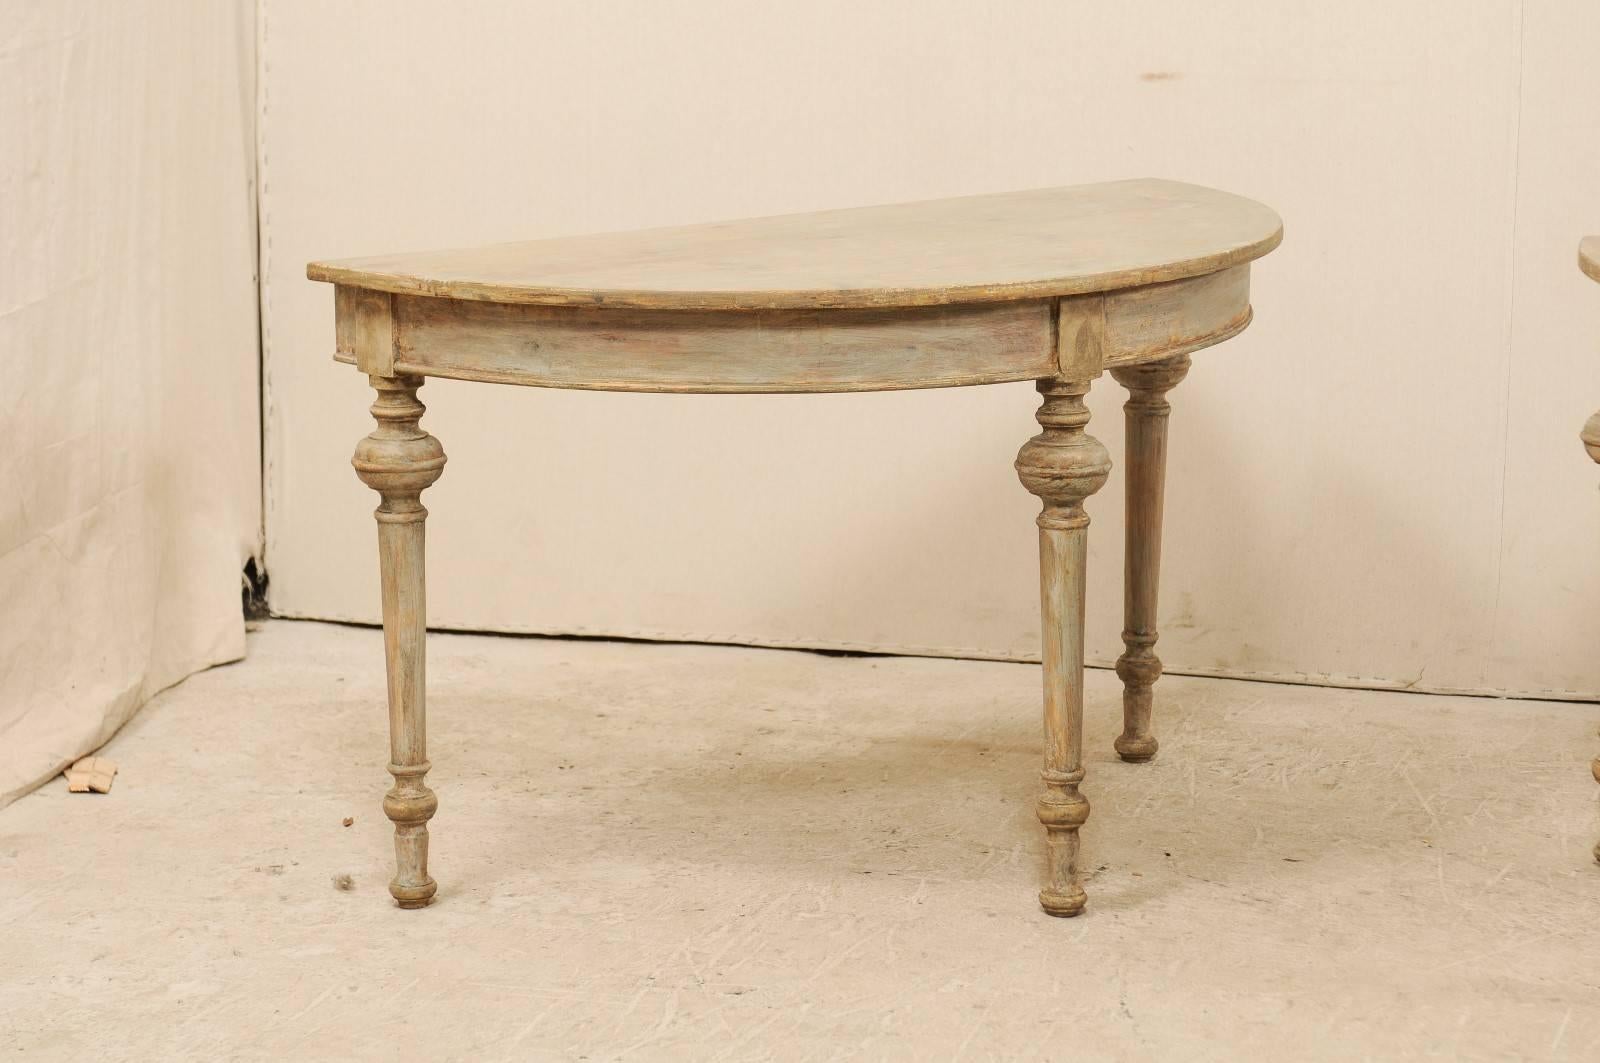 Carved Pair of Swedish Painted Wood Demi Lune Tables with Round Turned and Tapered Legs